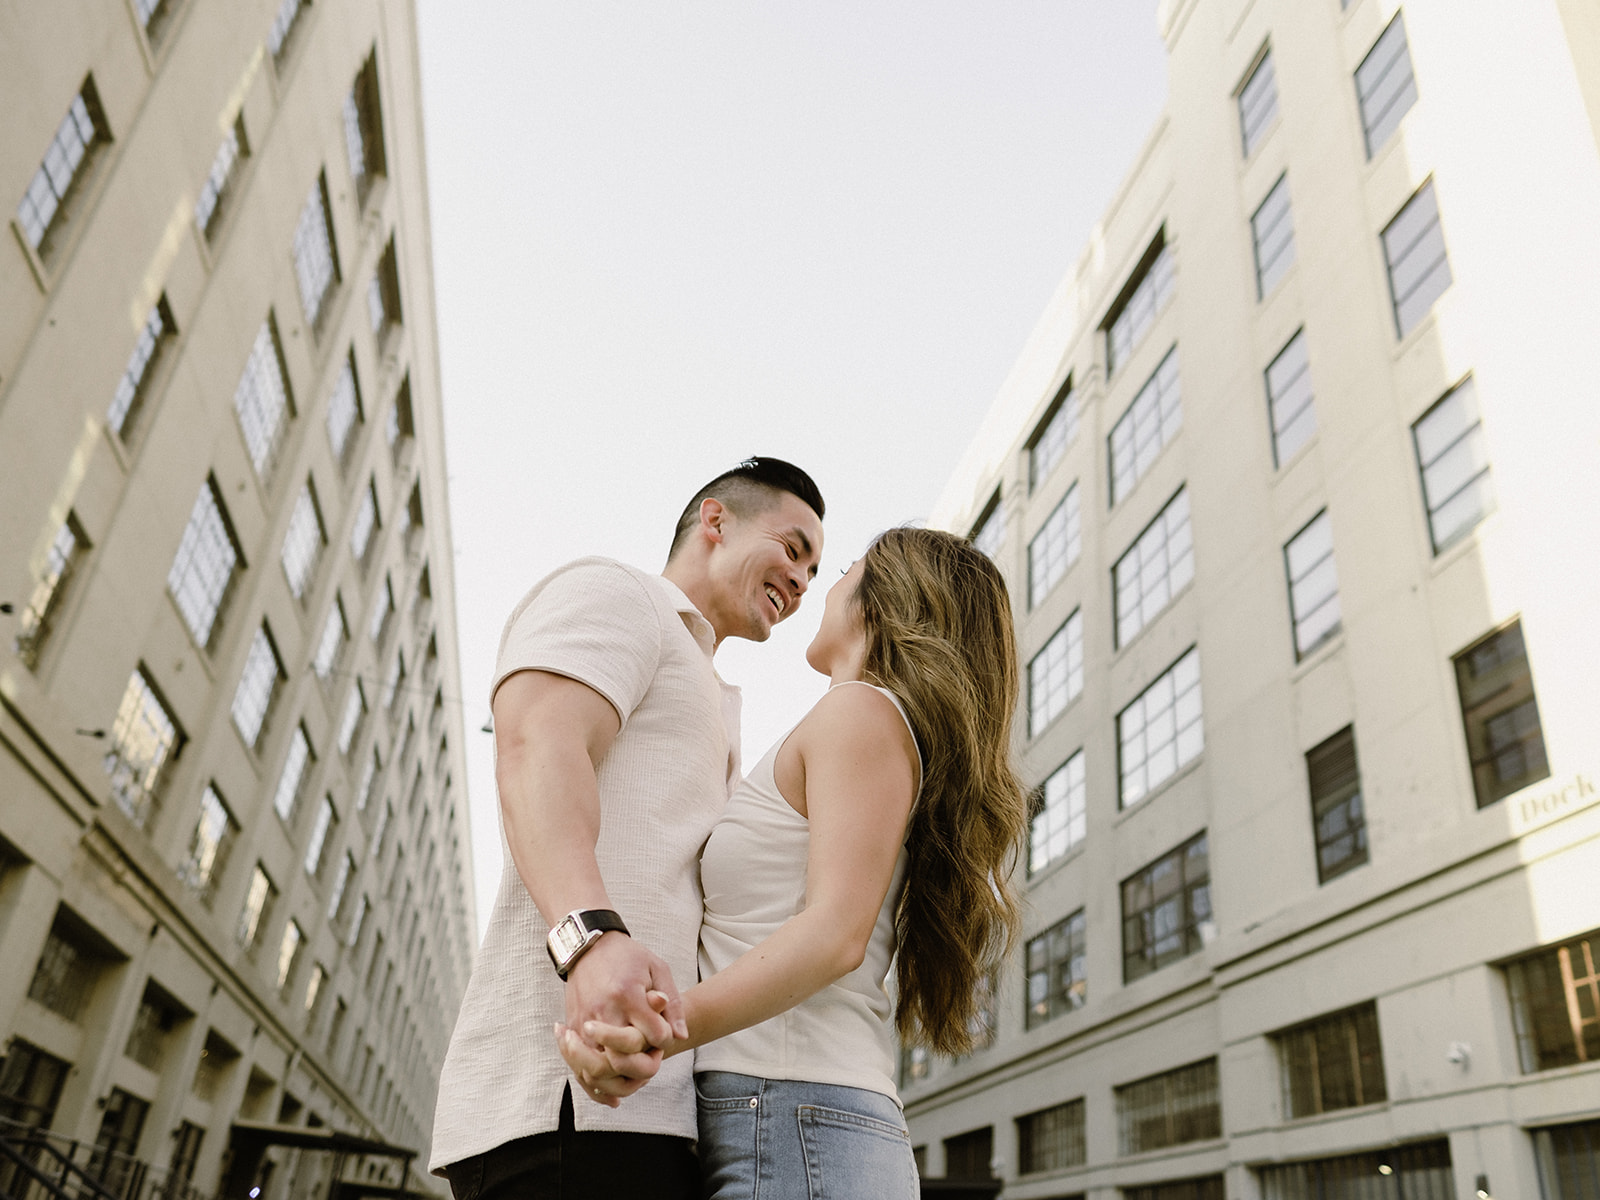 An engaged couple dances with buildings behind them.